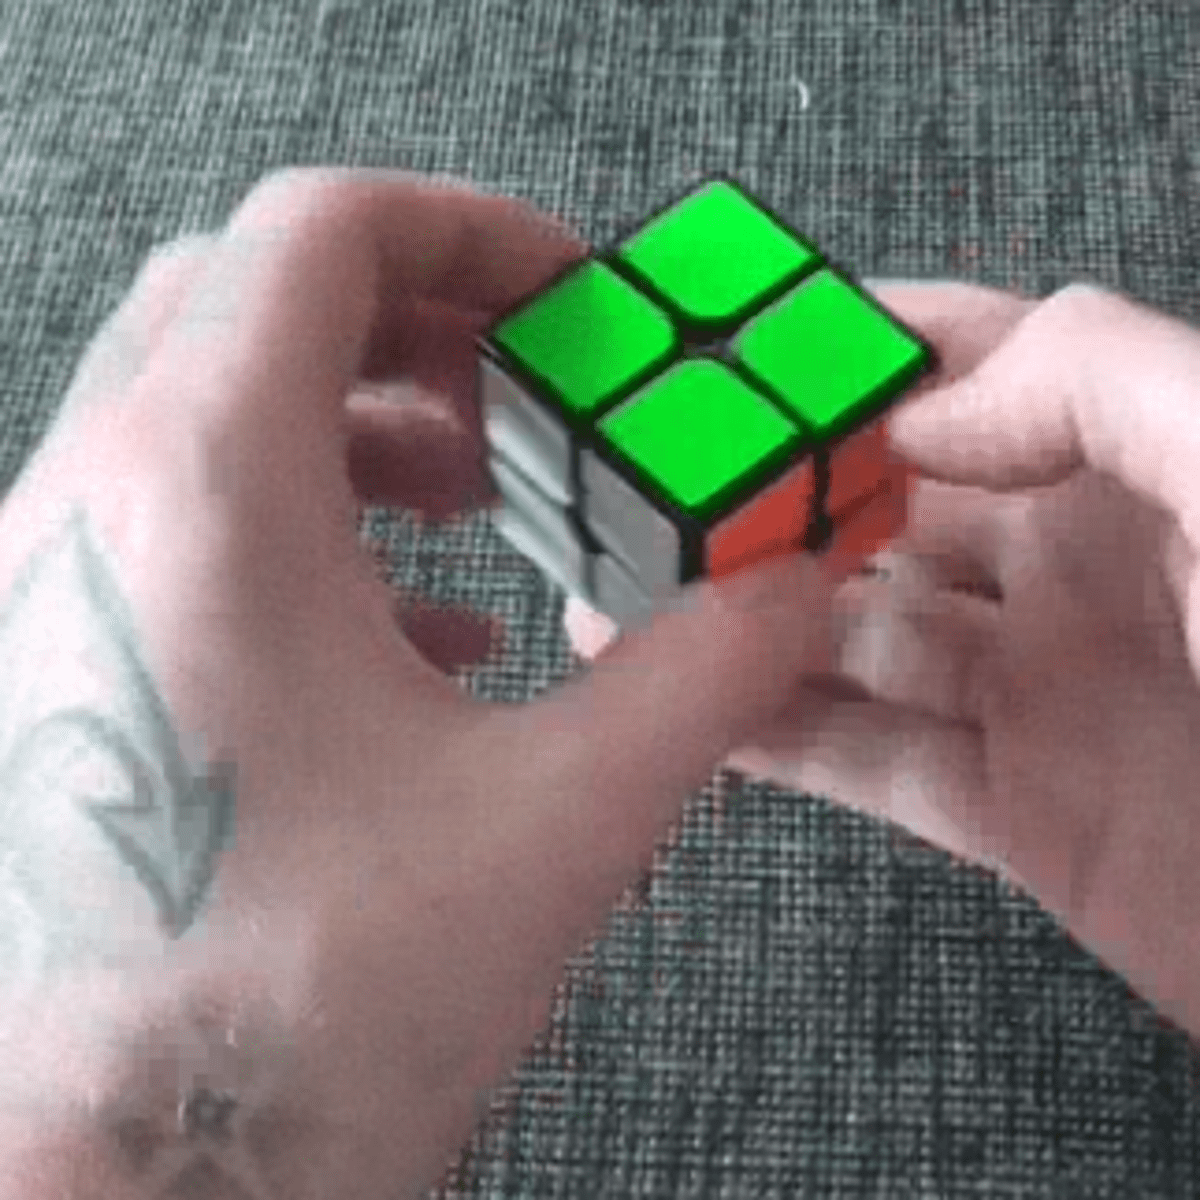 How to Solve the 2x2 Rubik's Cube Full Tutorial - HubPages